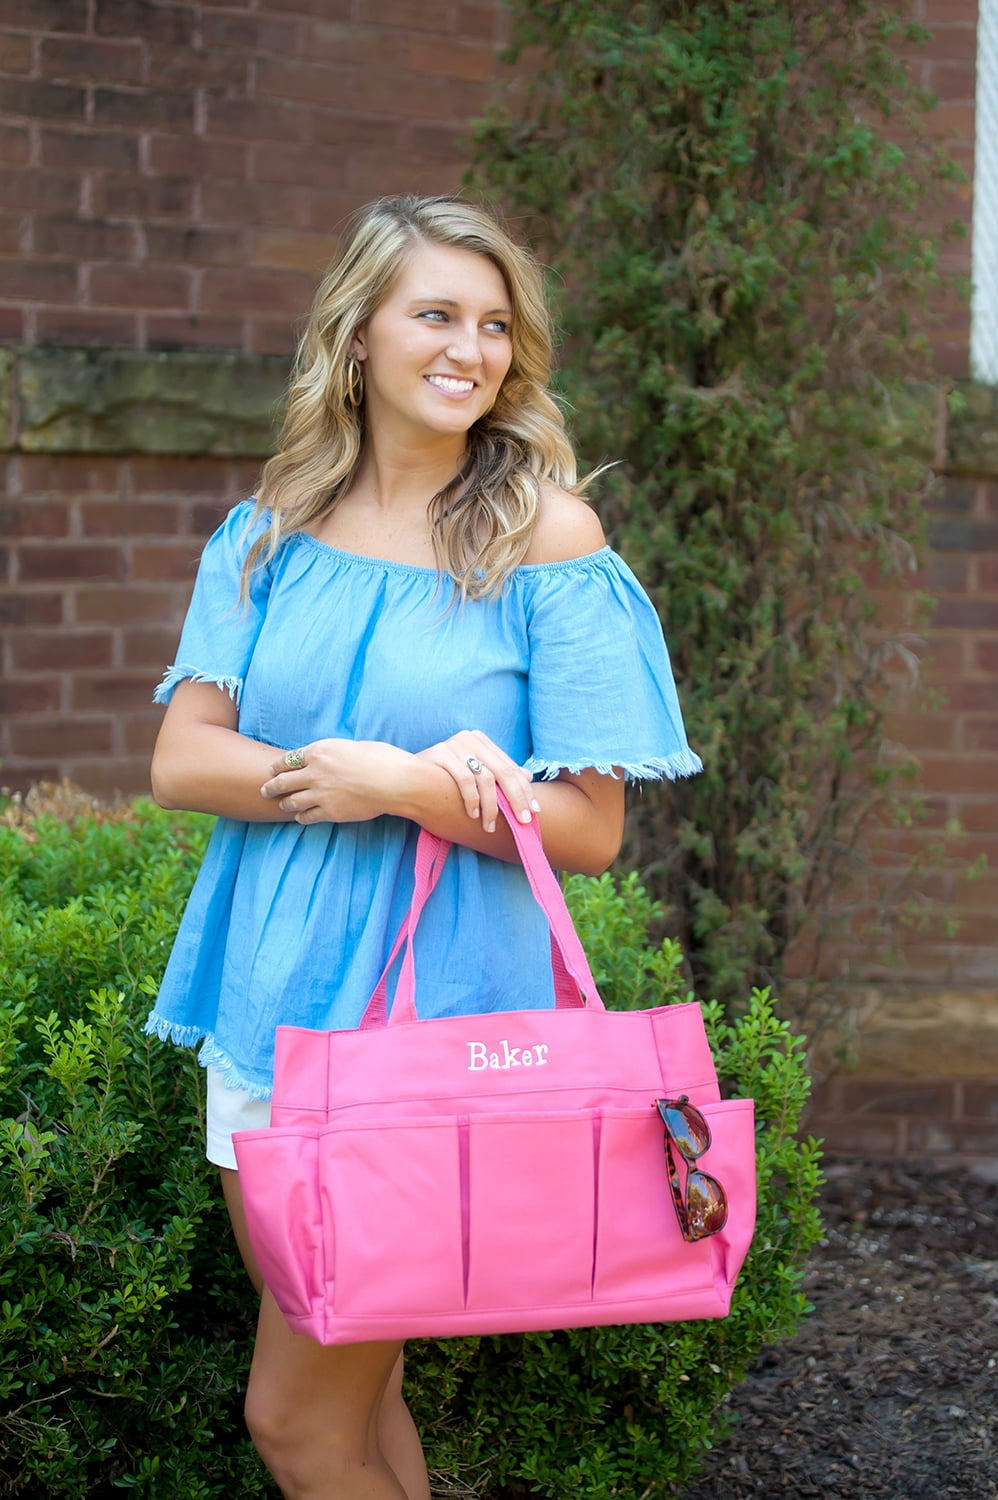 Hot Pink Carry All Bag